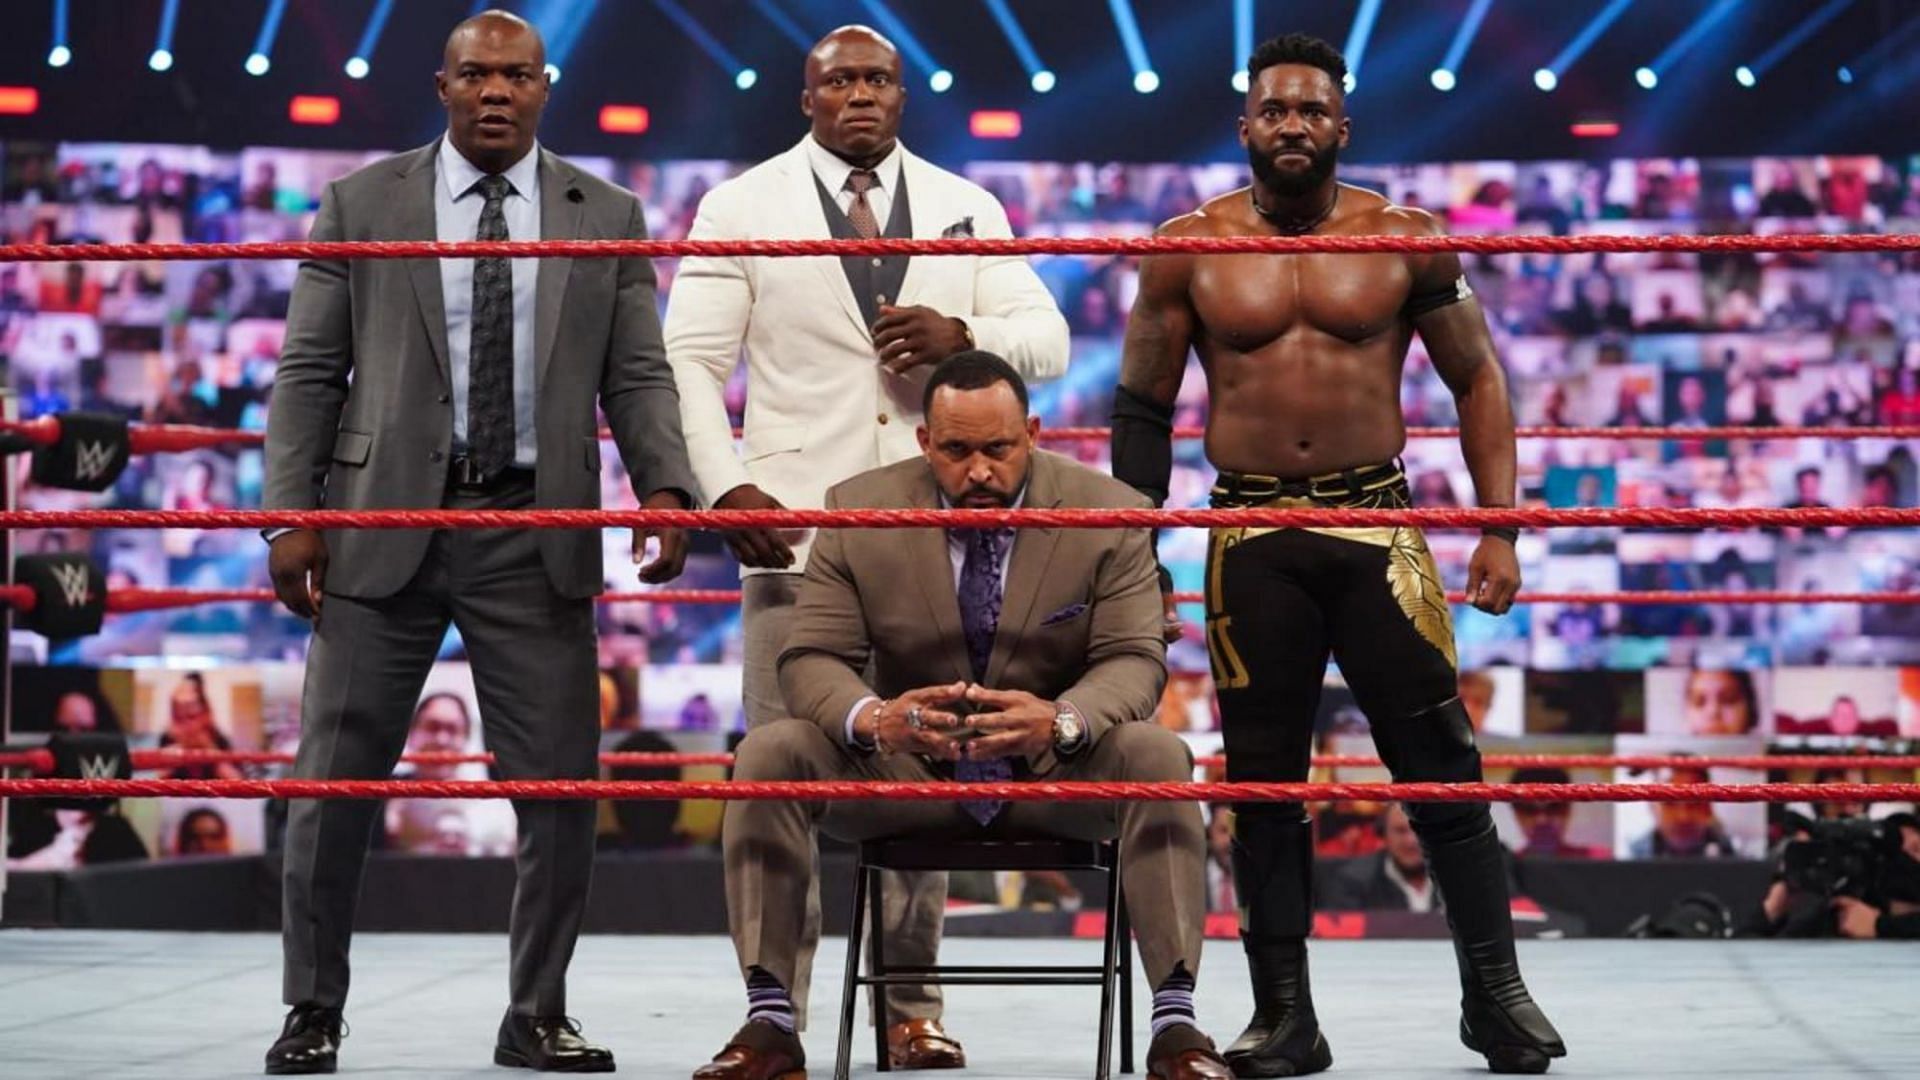 The Hurt Business was a dominant faction on Monday Night RAW